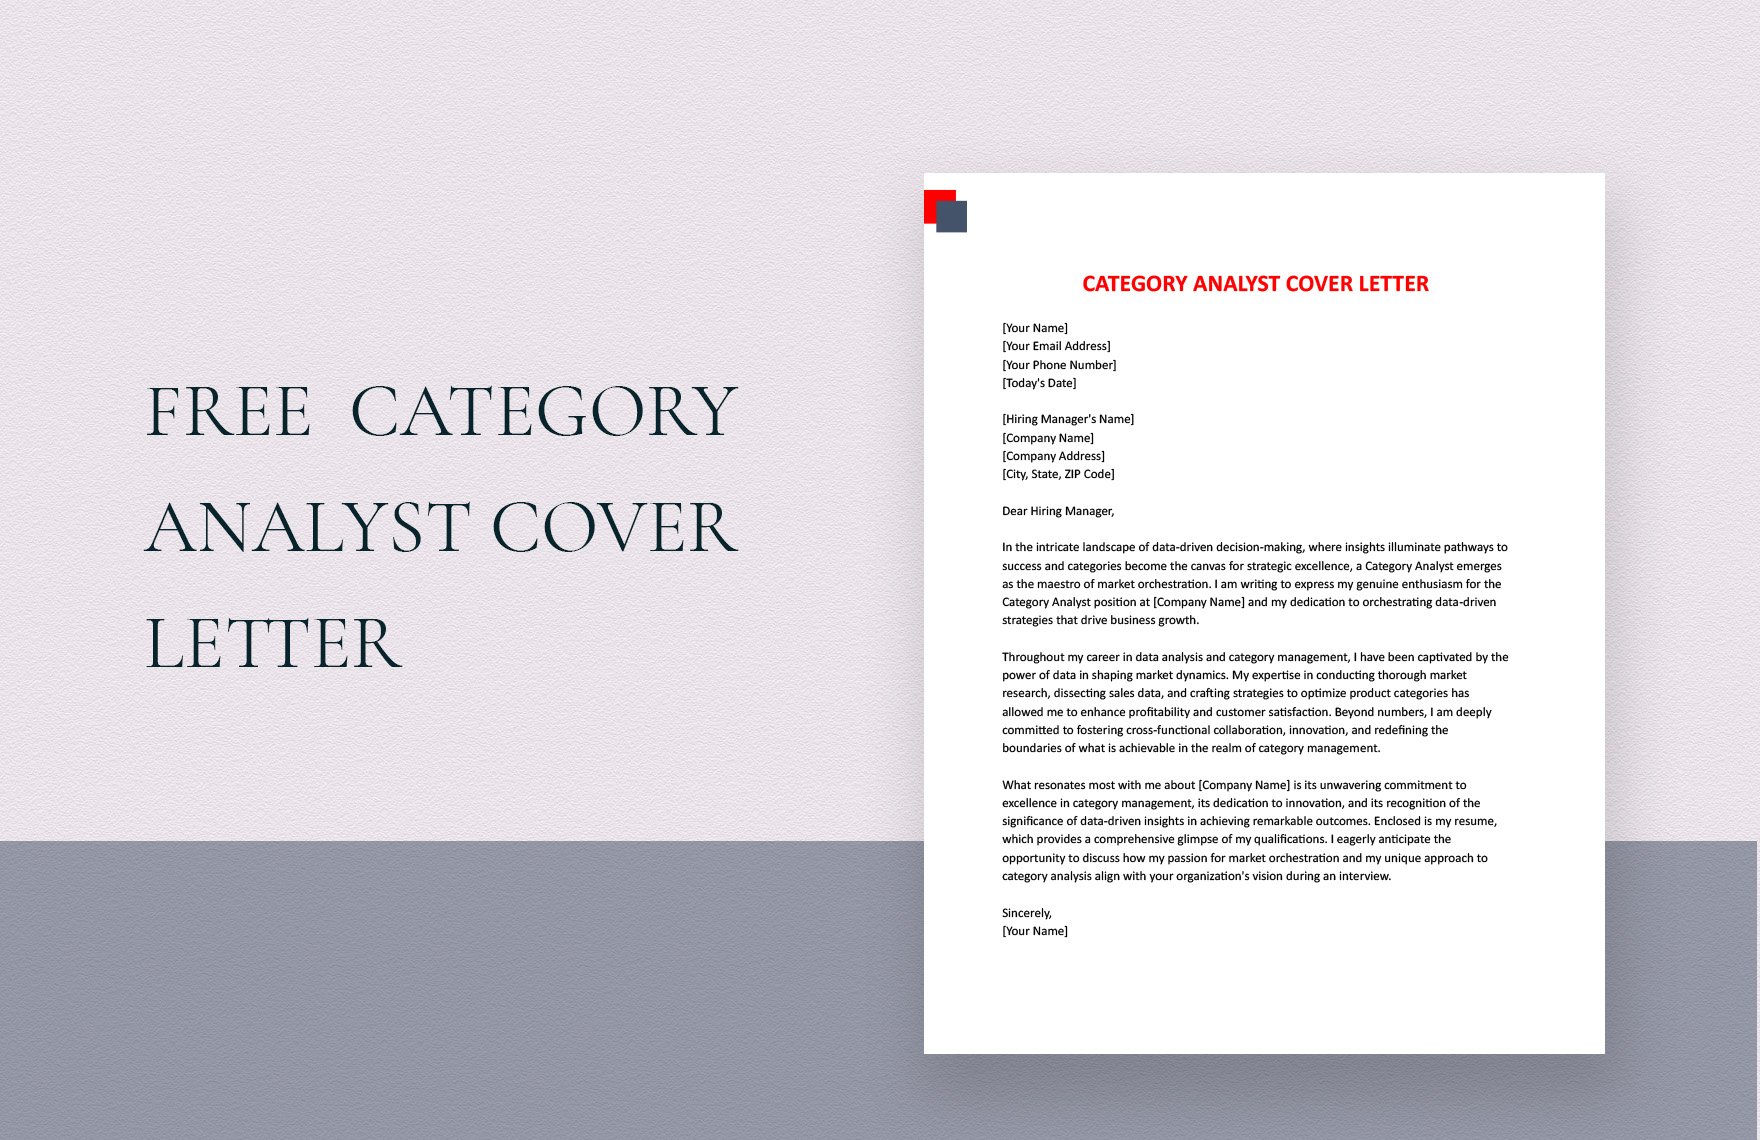 Category Analyst Cover Letter